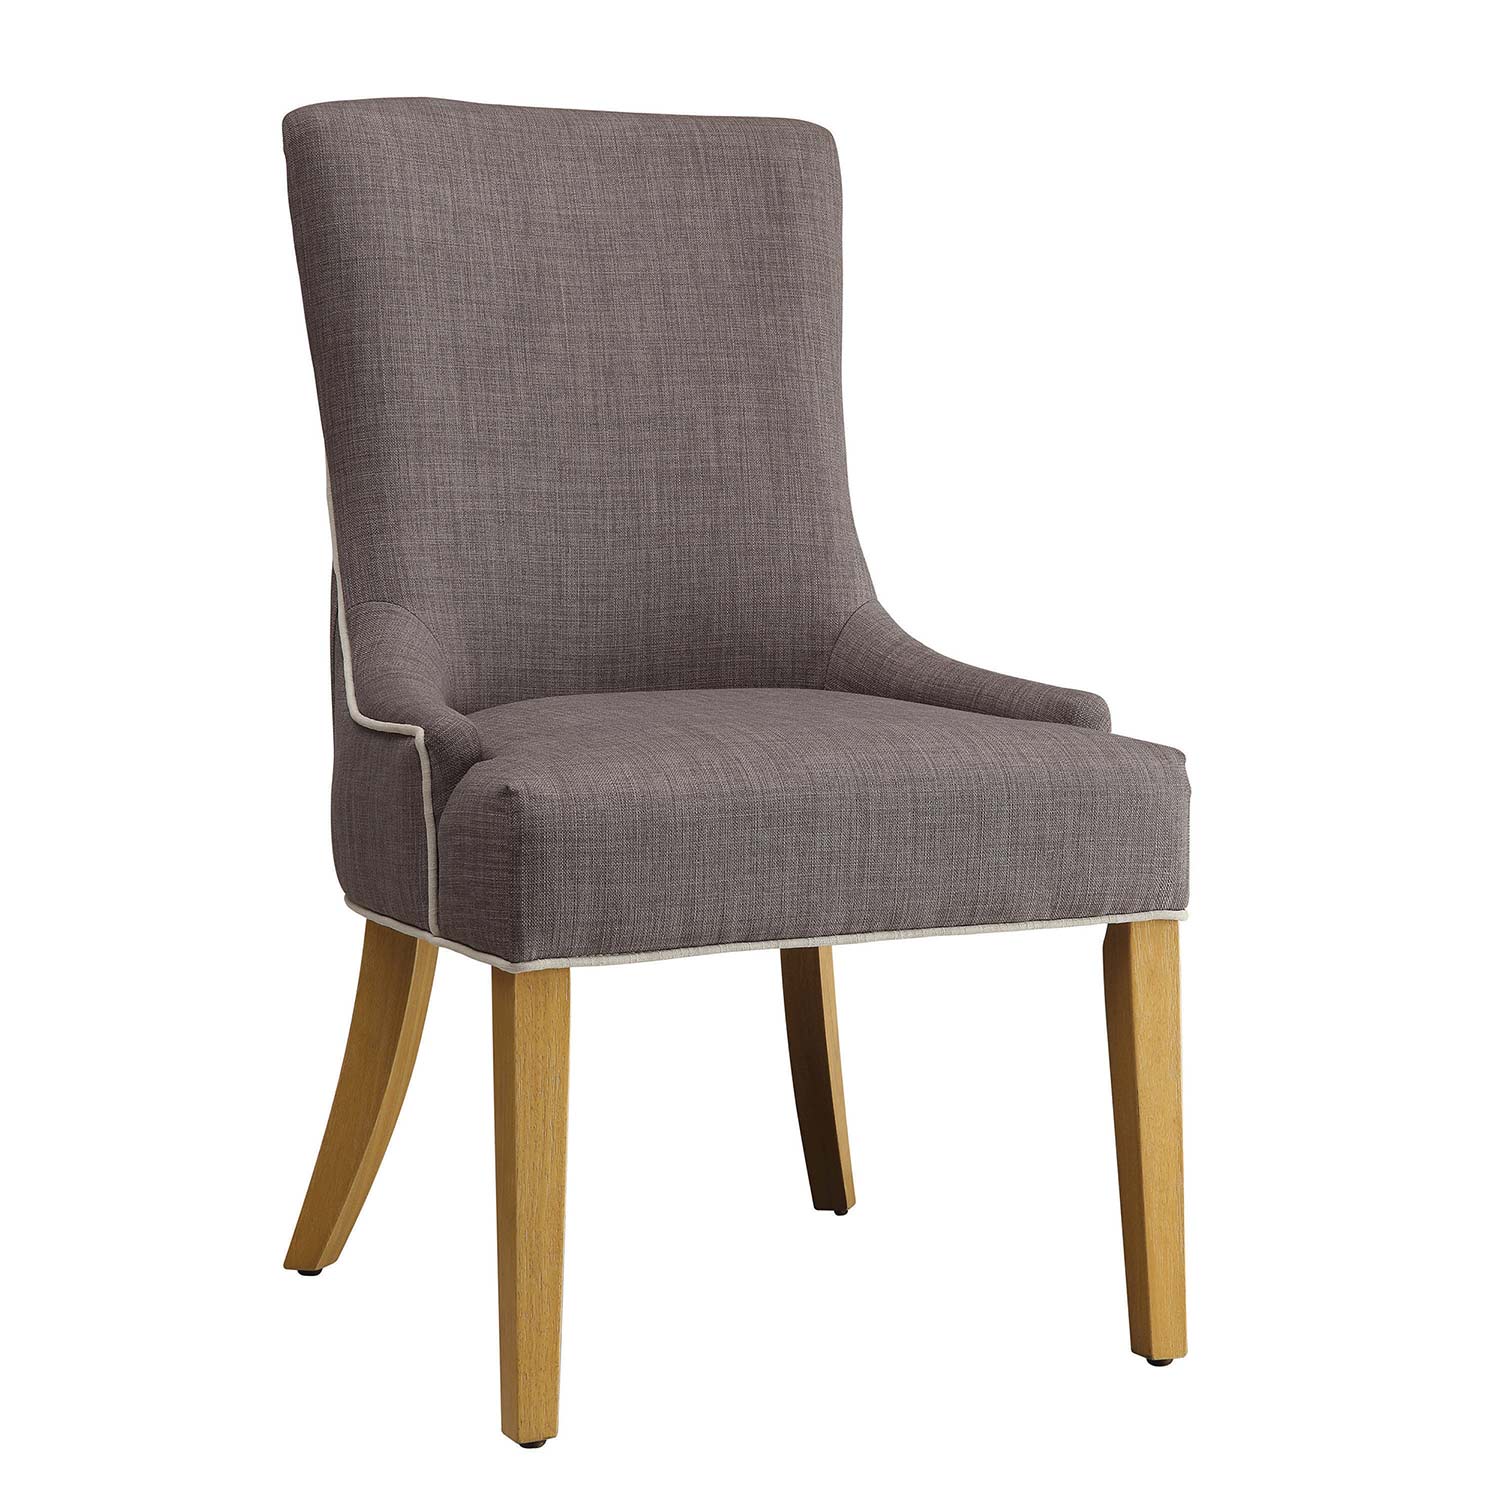 Coaster 104566 Side Chair - Grey/White Woven